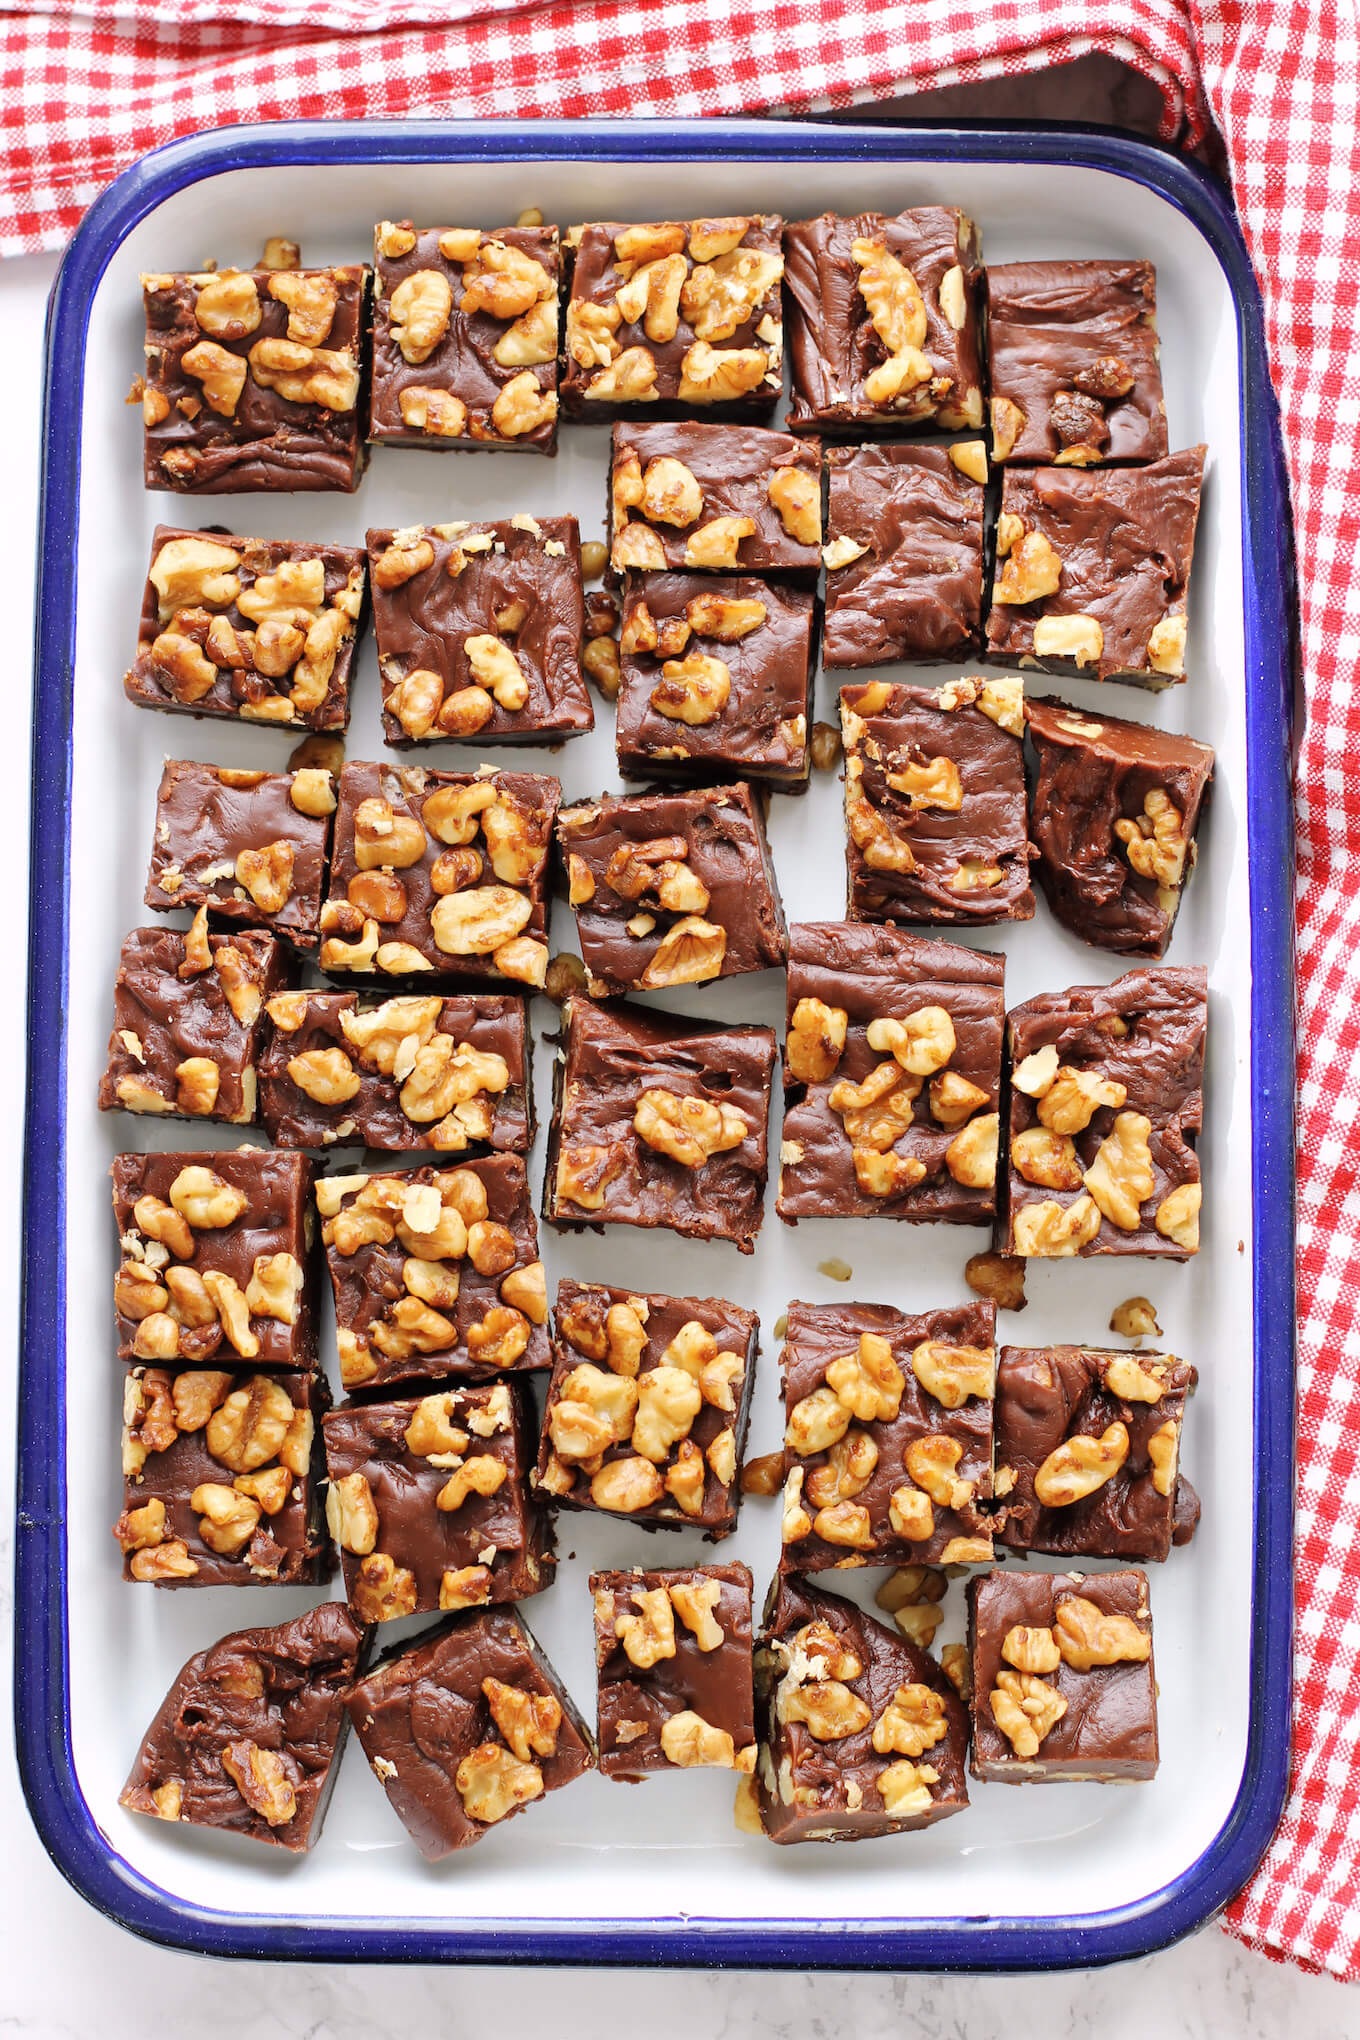 Chocolate Fudge with Candied Walnuts | Green Valley Kitchen